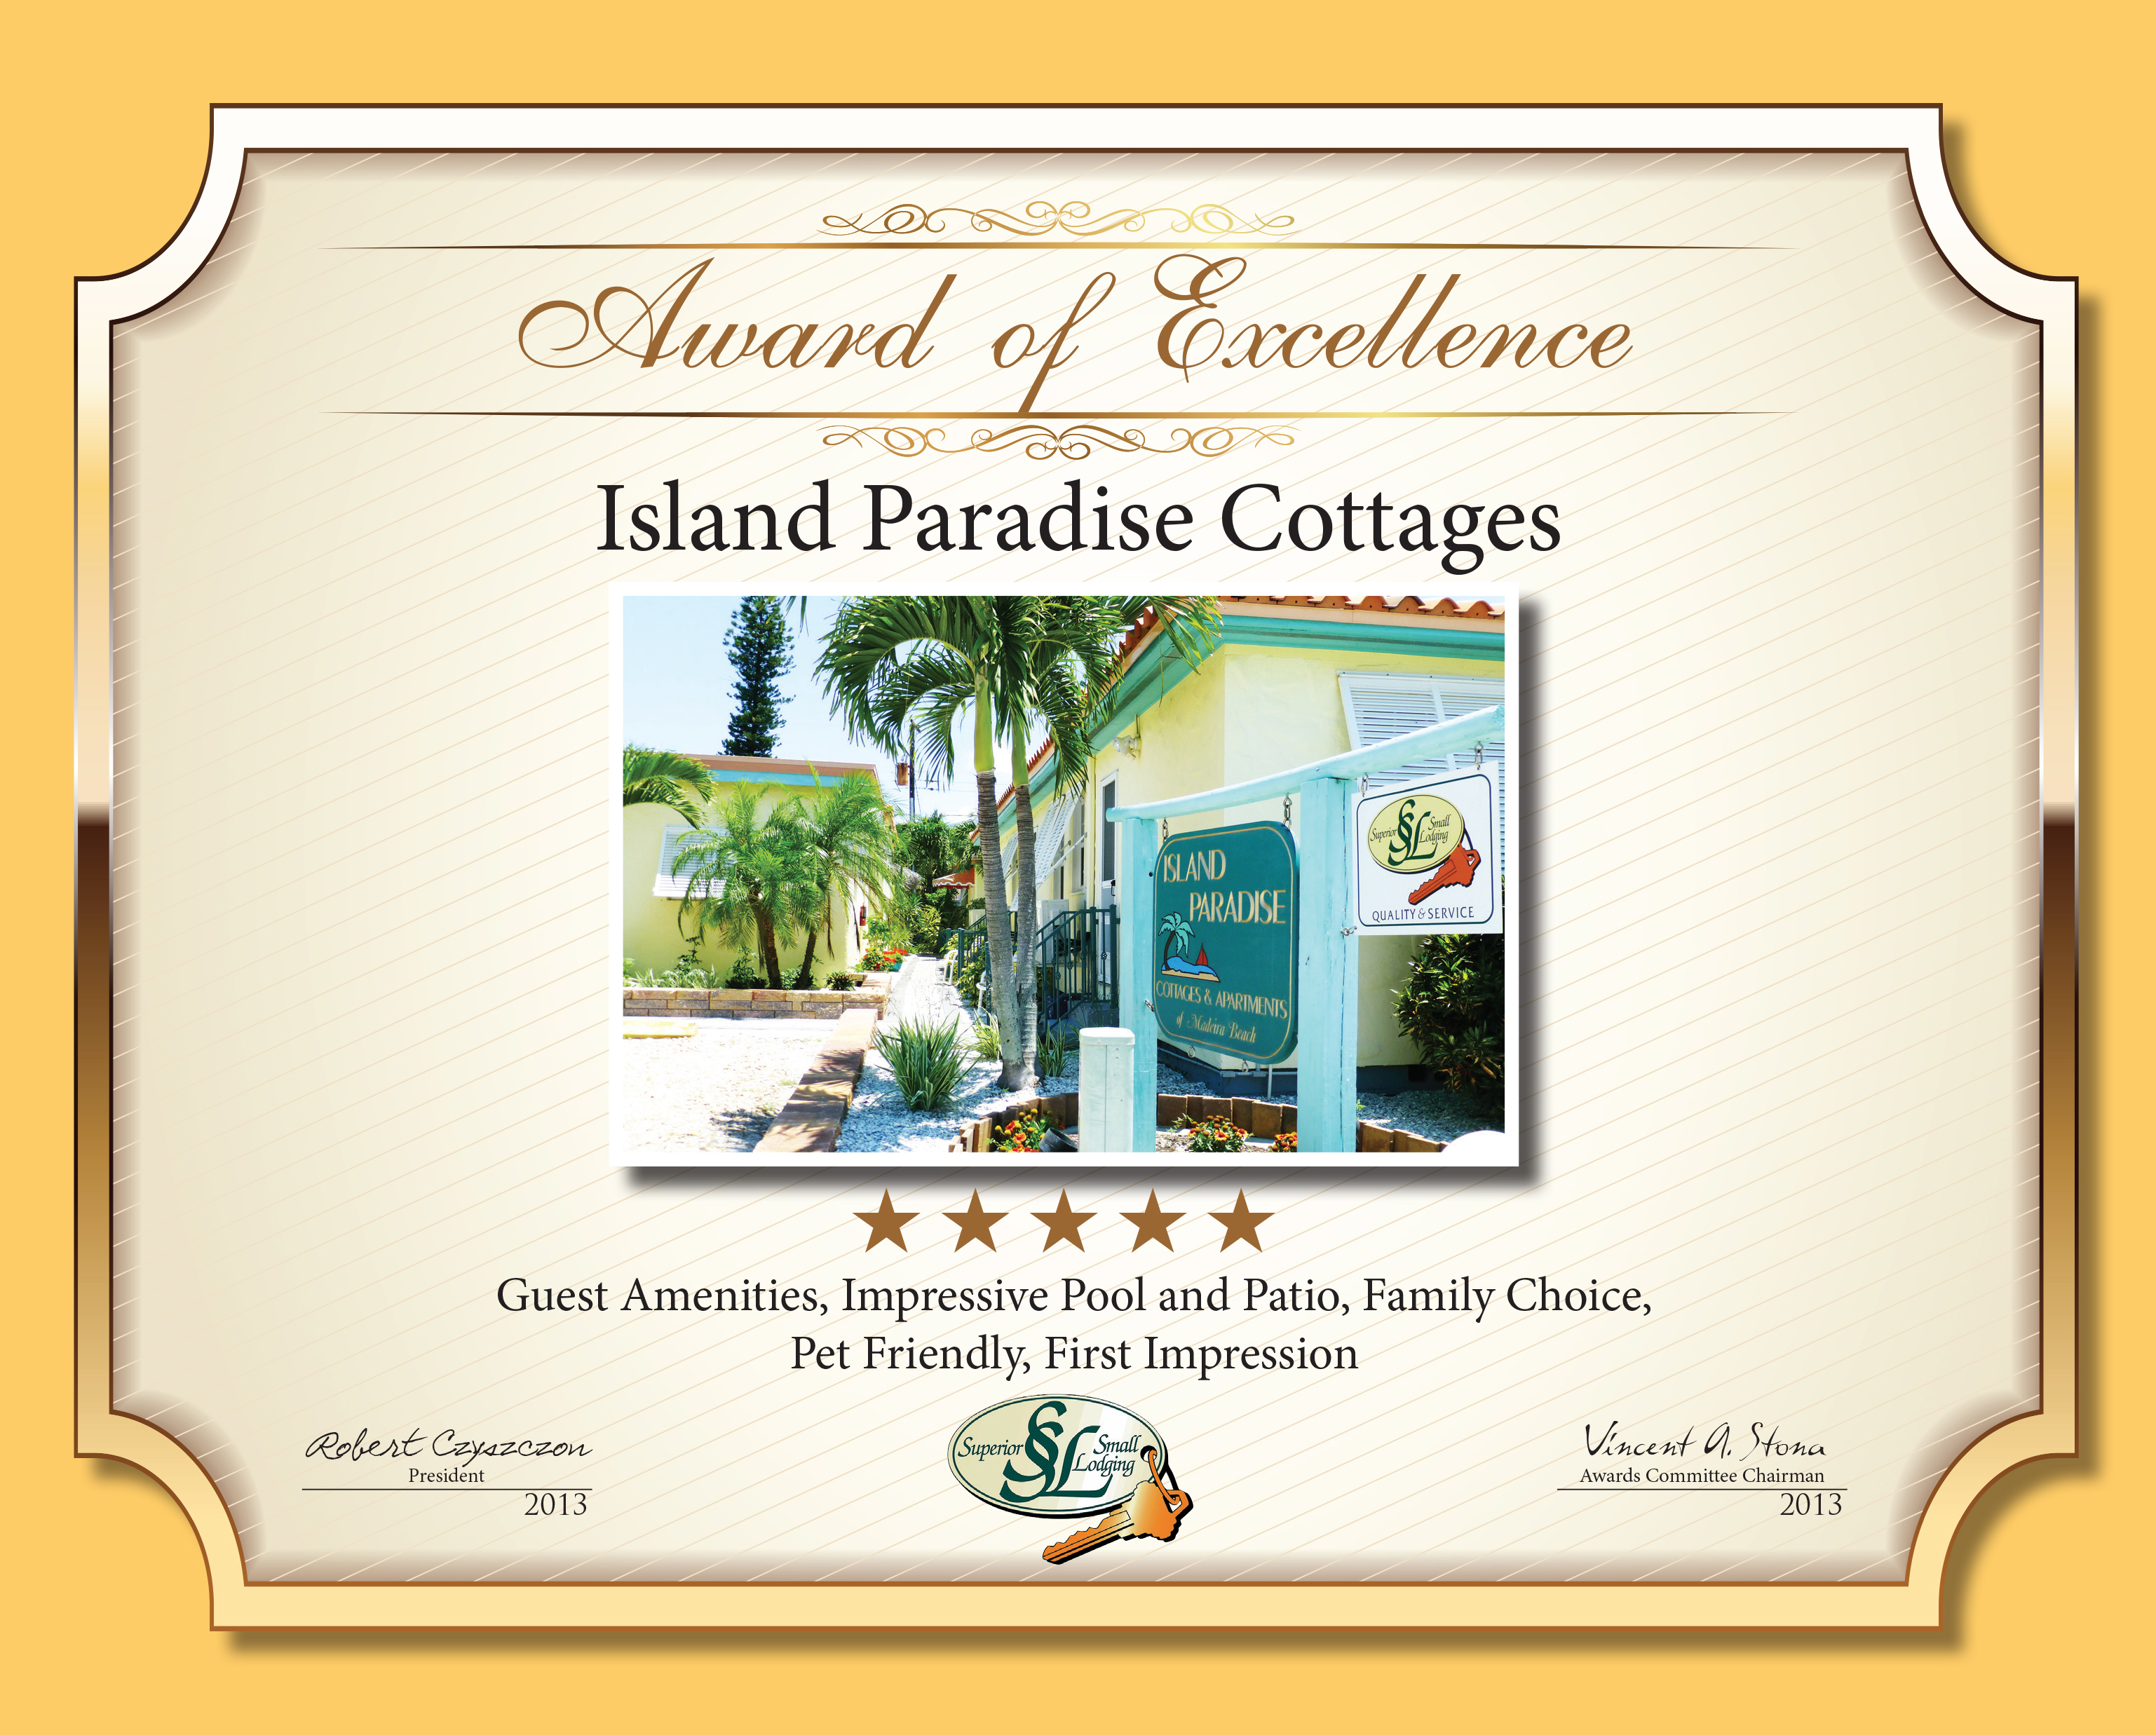 Island Paradise - Award of Excellence